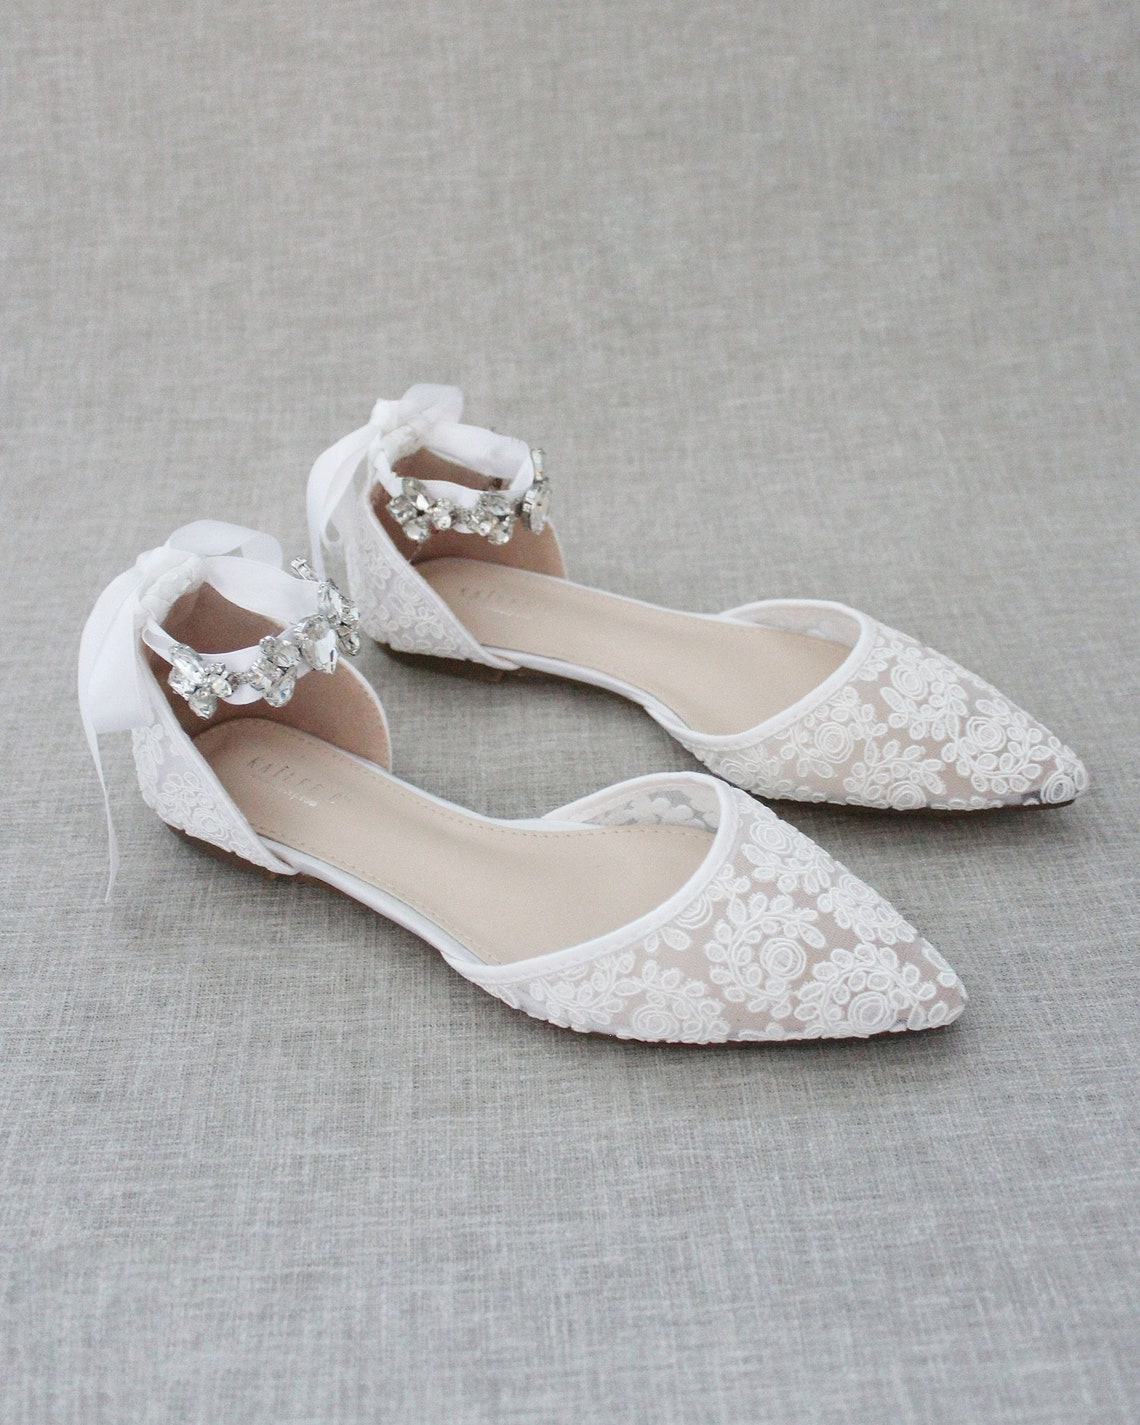 White Crochet Lace Pointy Toe Flats With NAVETTE CLUSTER - Etsy